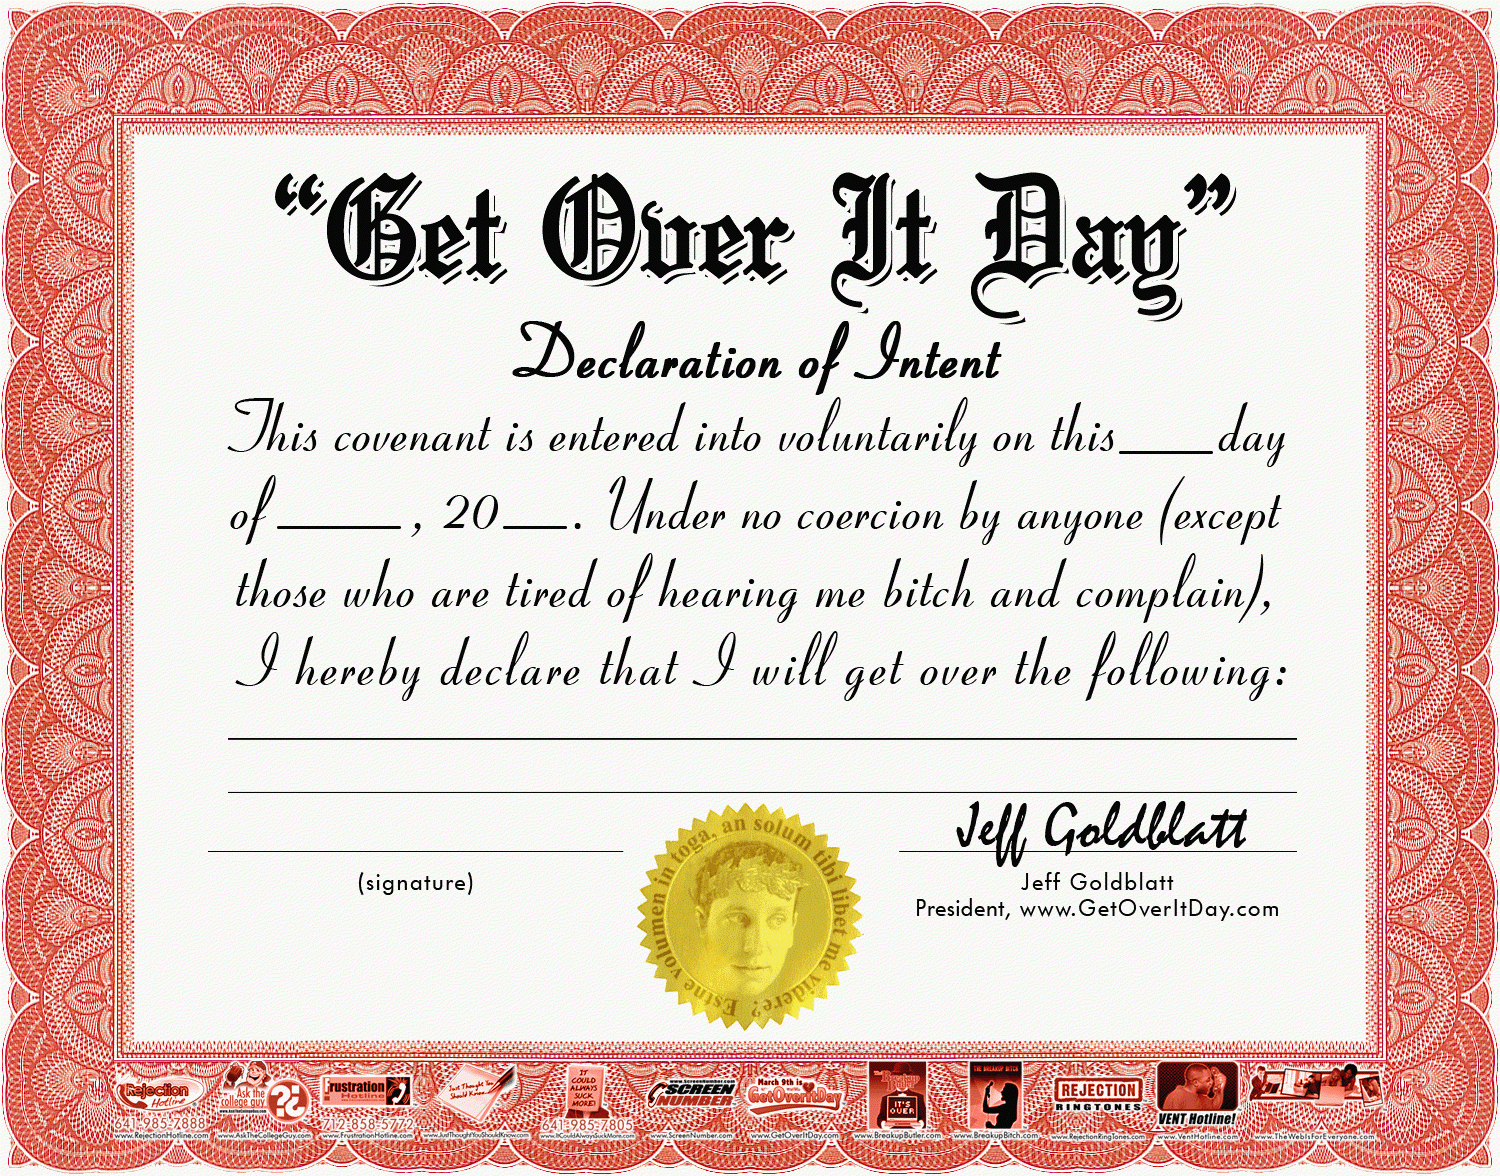 Funny Office Awards Youtube. Silly Certificates Funny Awards Intended For Funny Certificates For Employees Templates